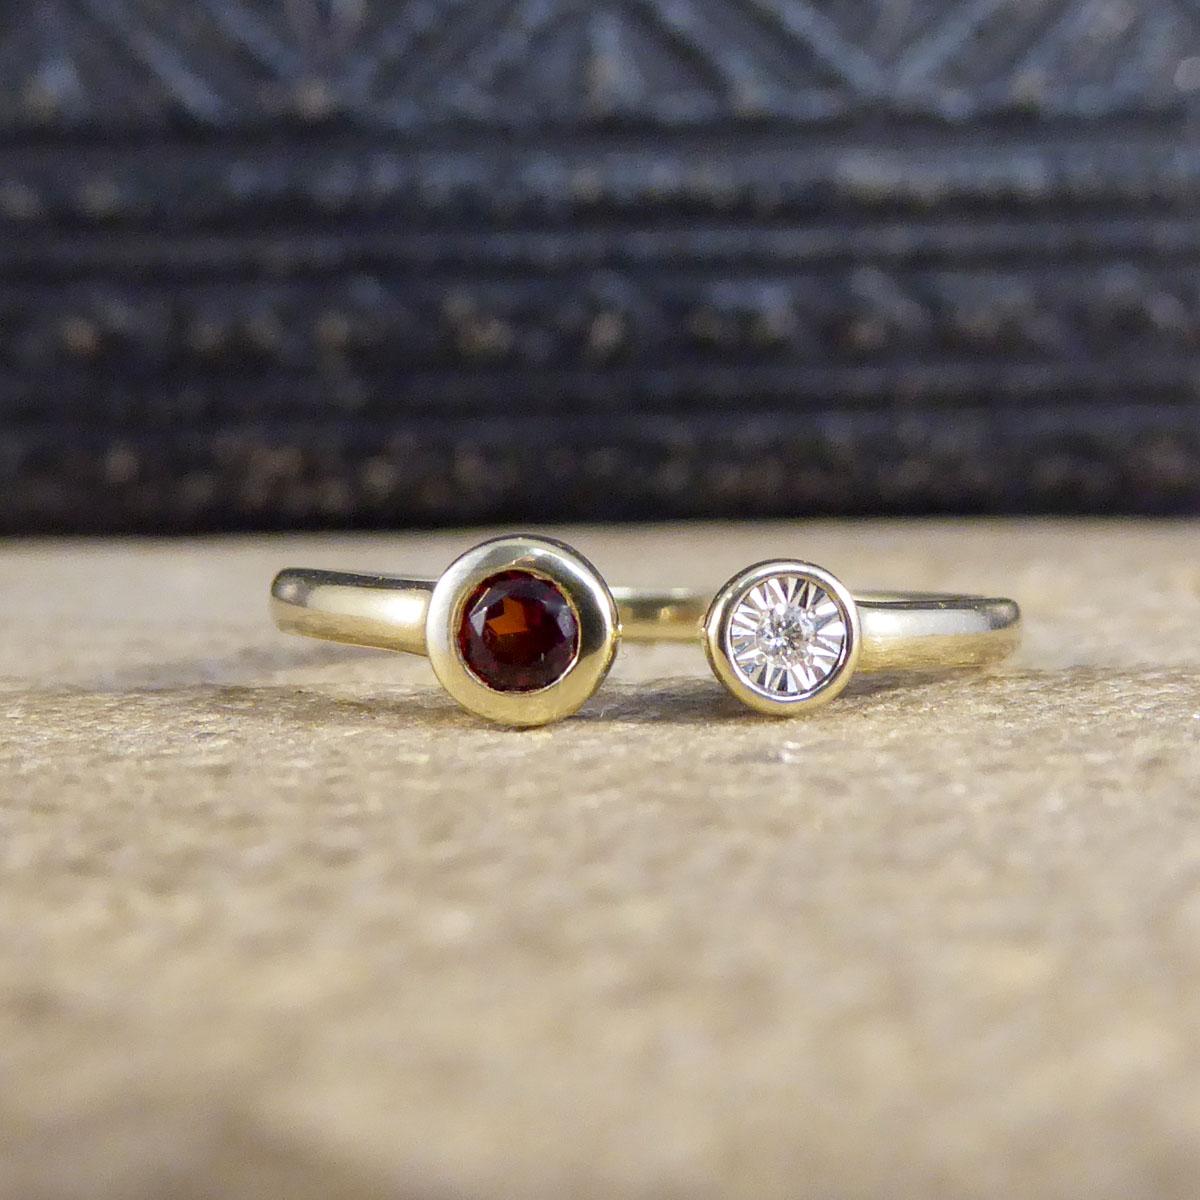 Such a beautiful torque ring featuring a Garnet and Diamond. The Diamond itself is a 1pt stone in an illusion setting giving it the look of a larger Diamond in a rub over collet. The Garnet shows such a beautiful and bright red colour set in a rub